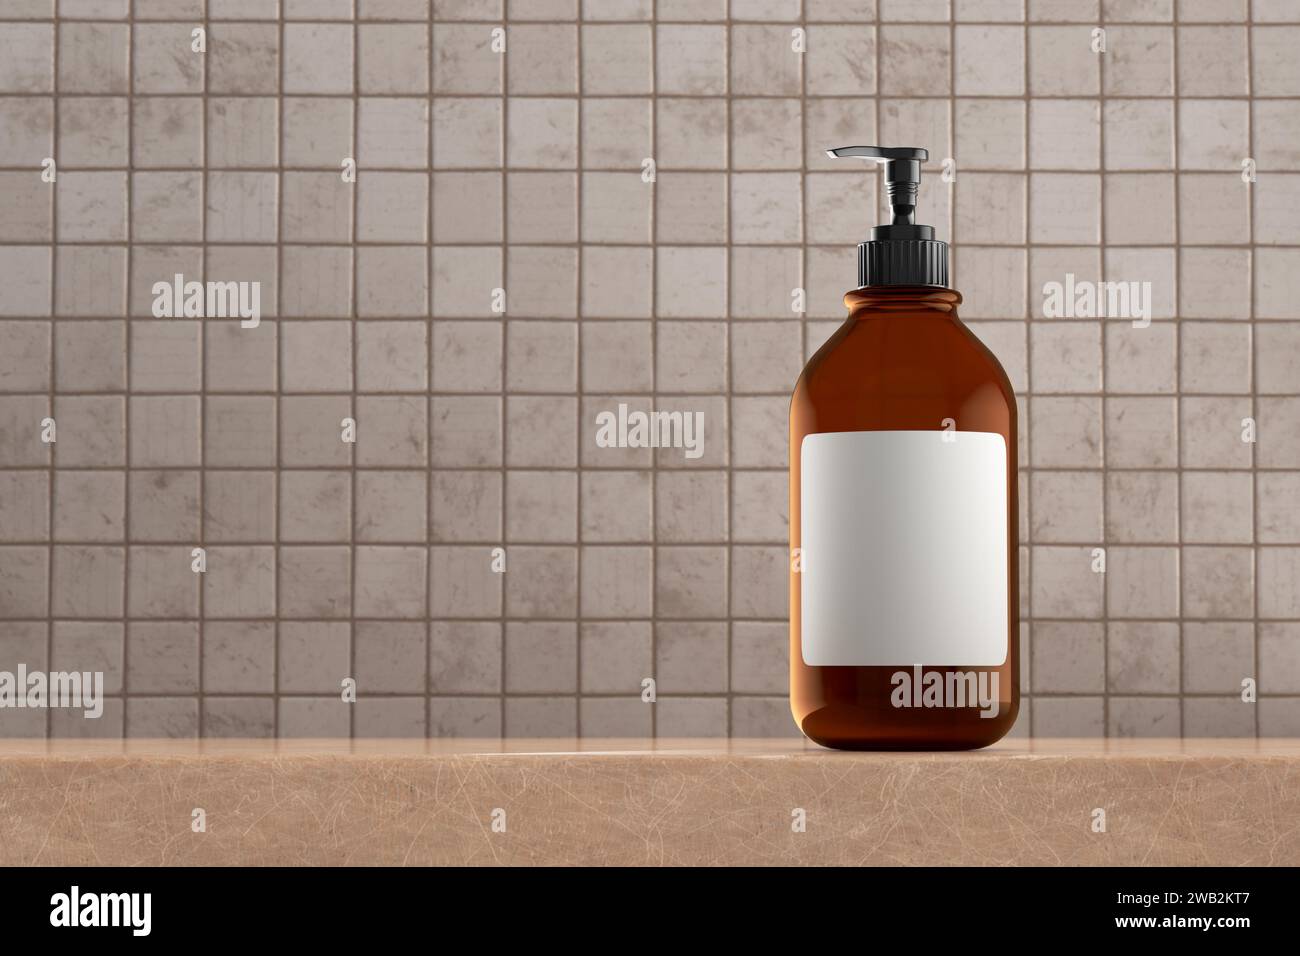 Amber colored liquid soap bottle on a marble bathroom counter. Abstract natural, organic mock up for product advertisement, spa, body care, relaxation Stock Photo